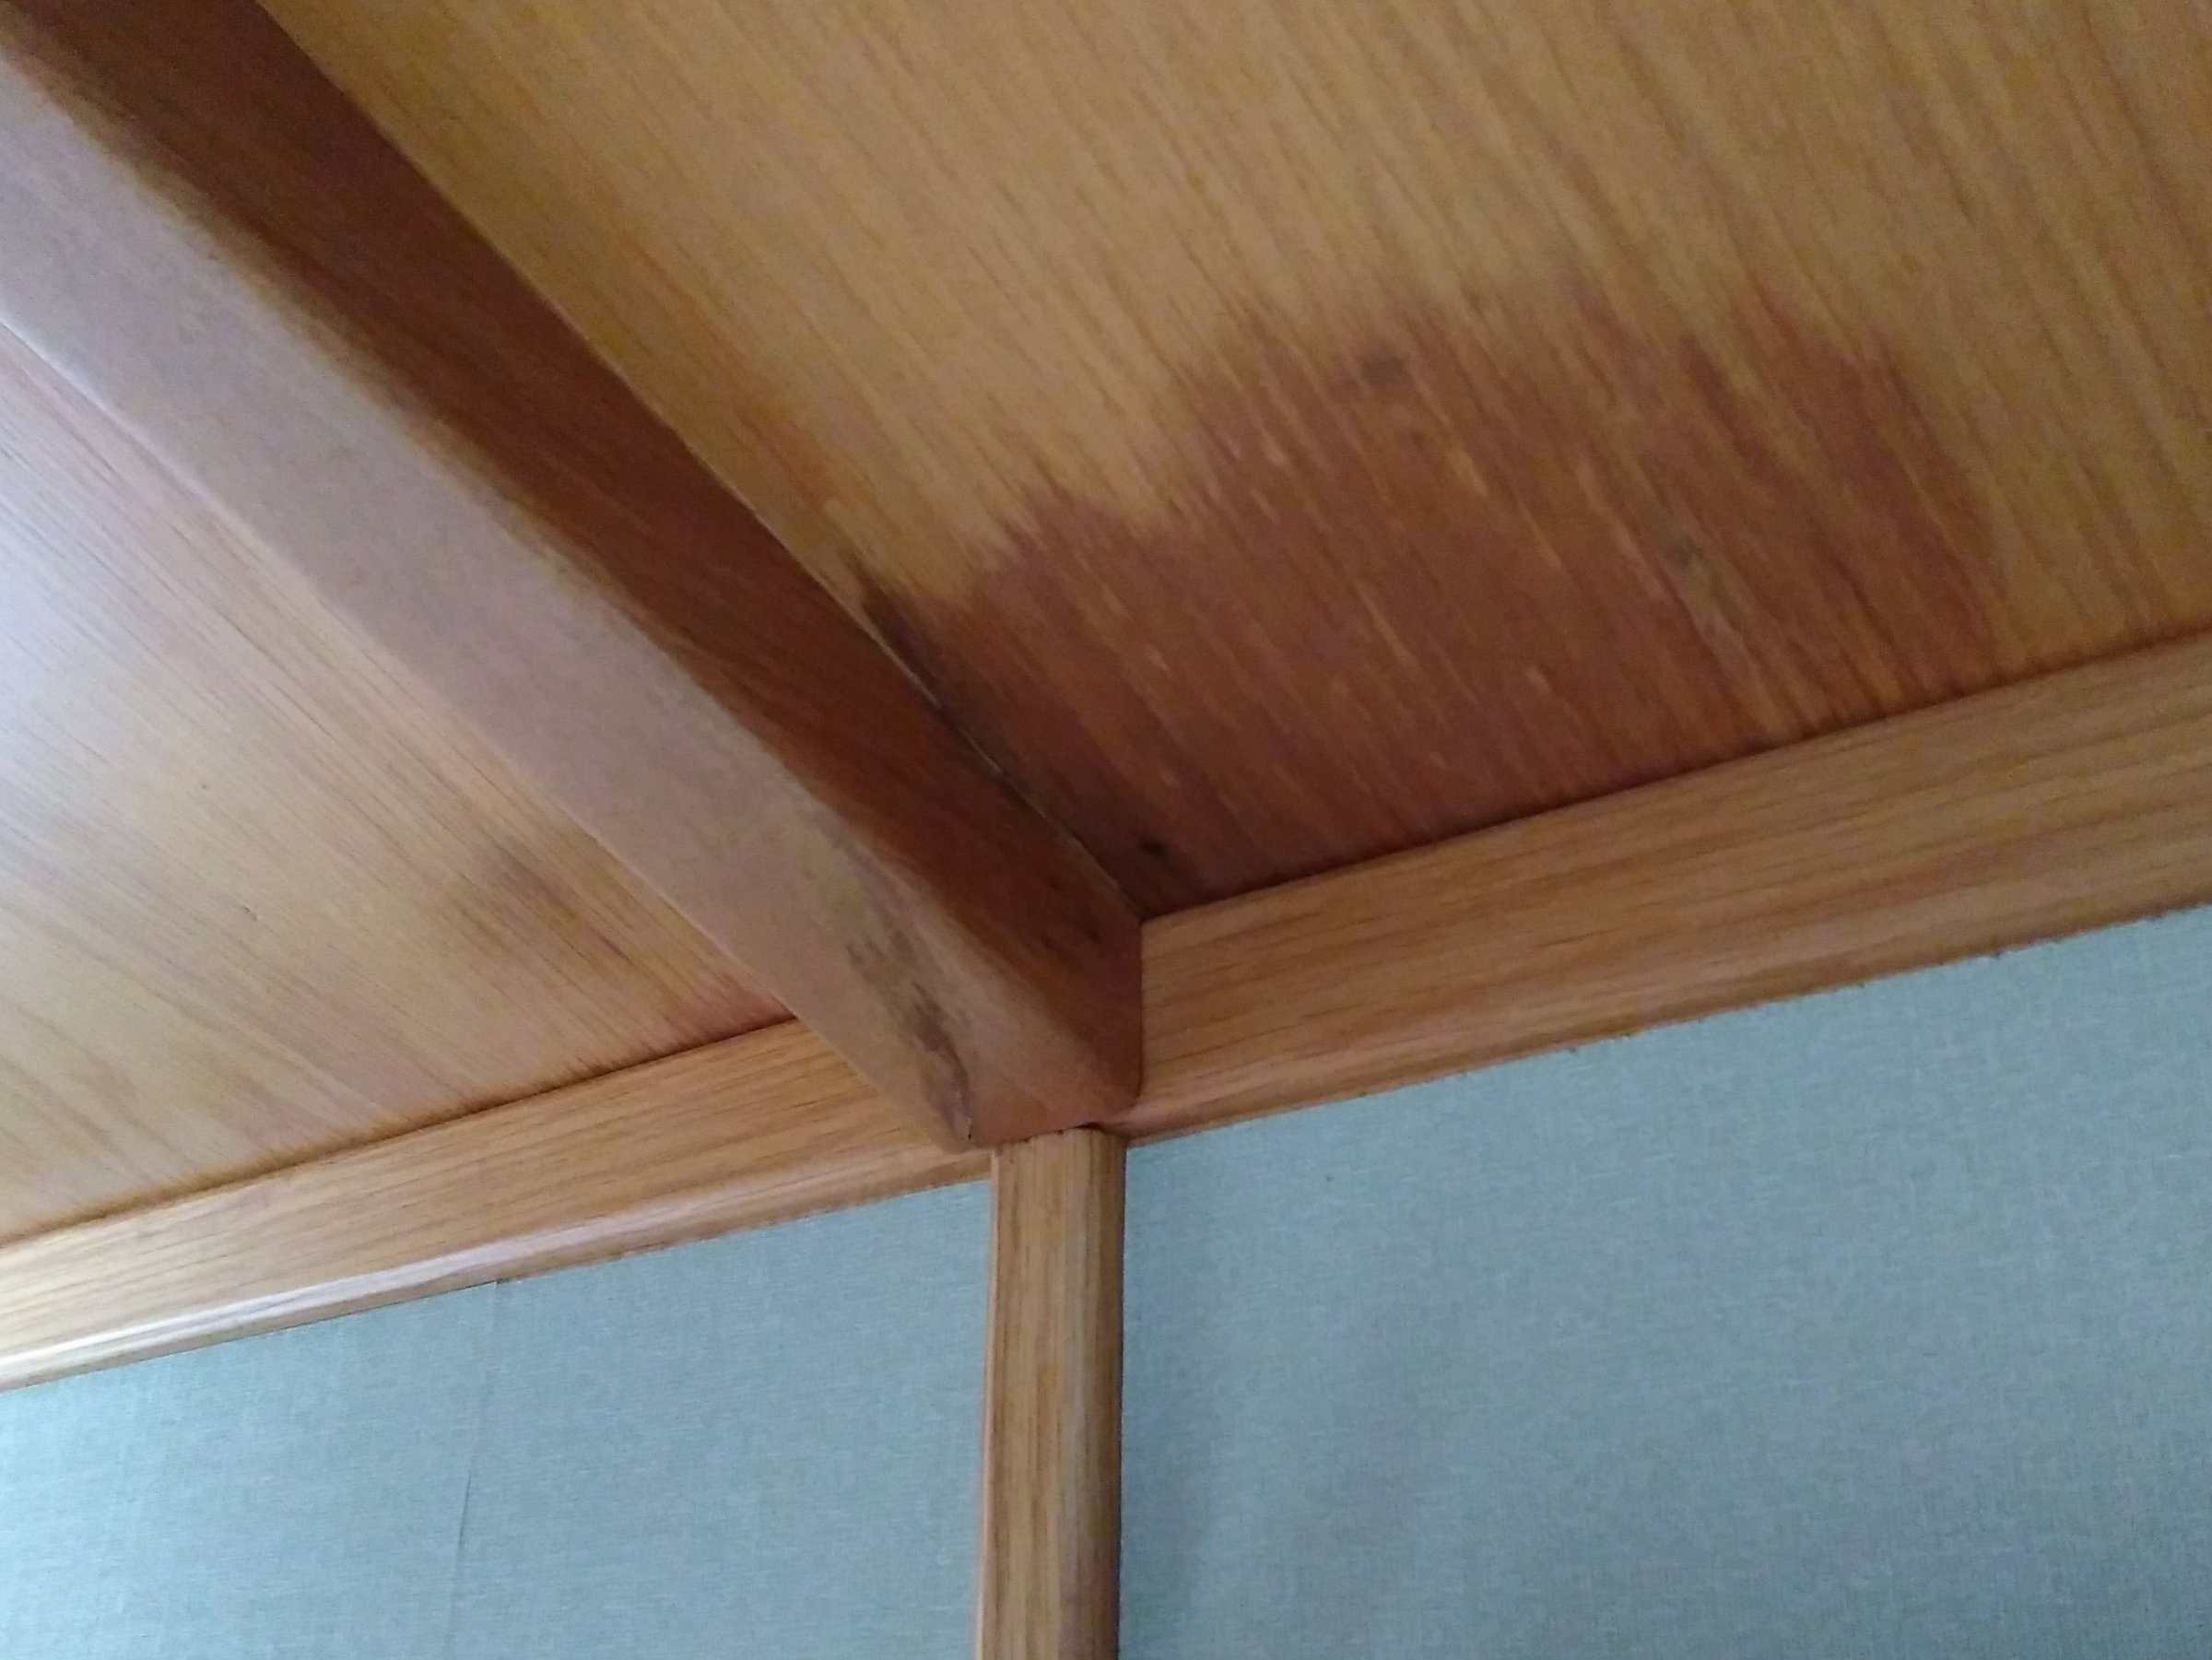 Advice Please Damp Patches On Ceiling Boat Building